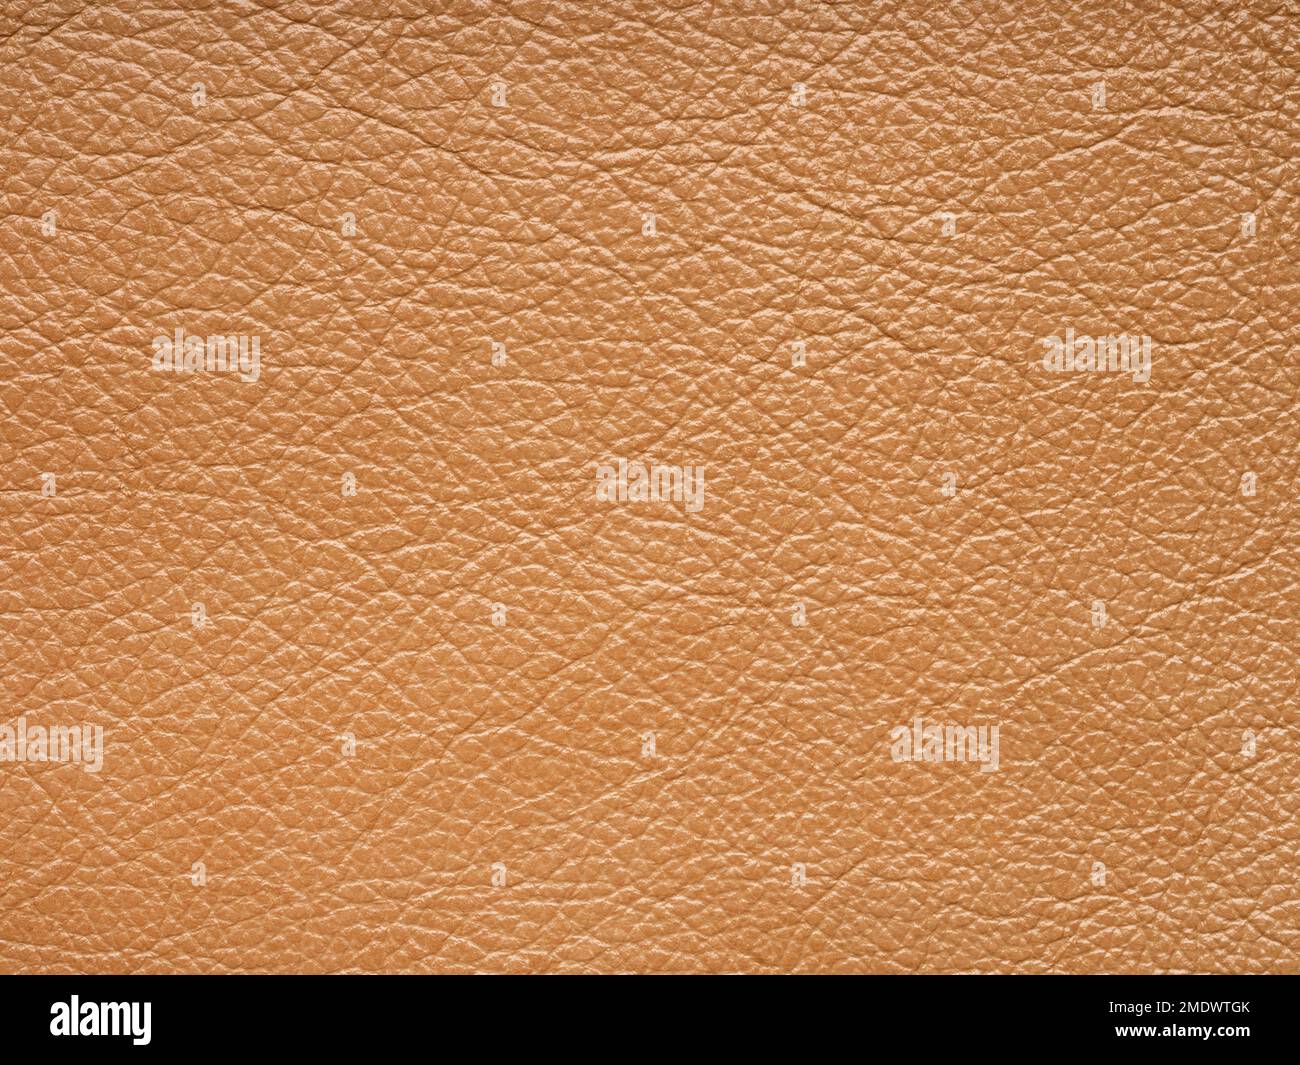 Oeange quality leather, natural material with design lines pattern. Can use wallpaper or backdrop luxury event, design upholstered furniture, clothing Stock Photo